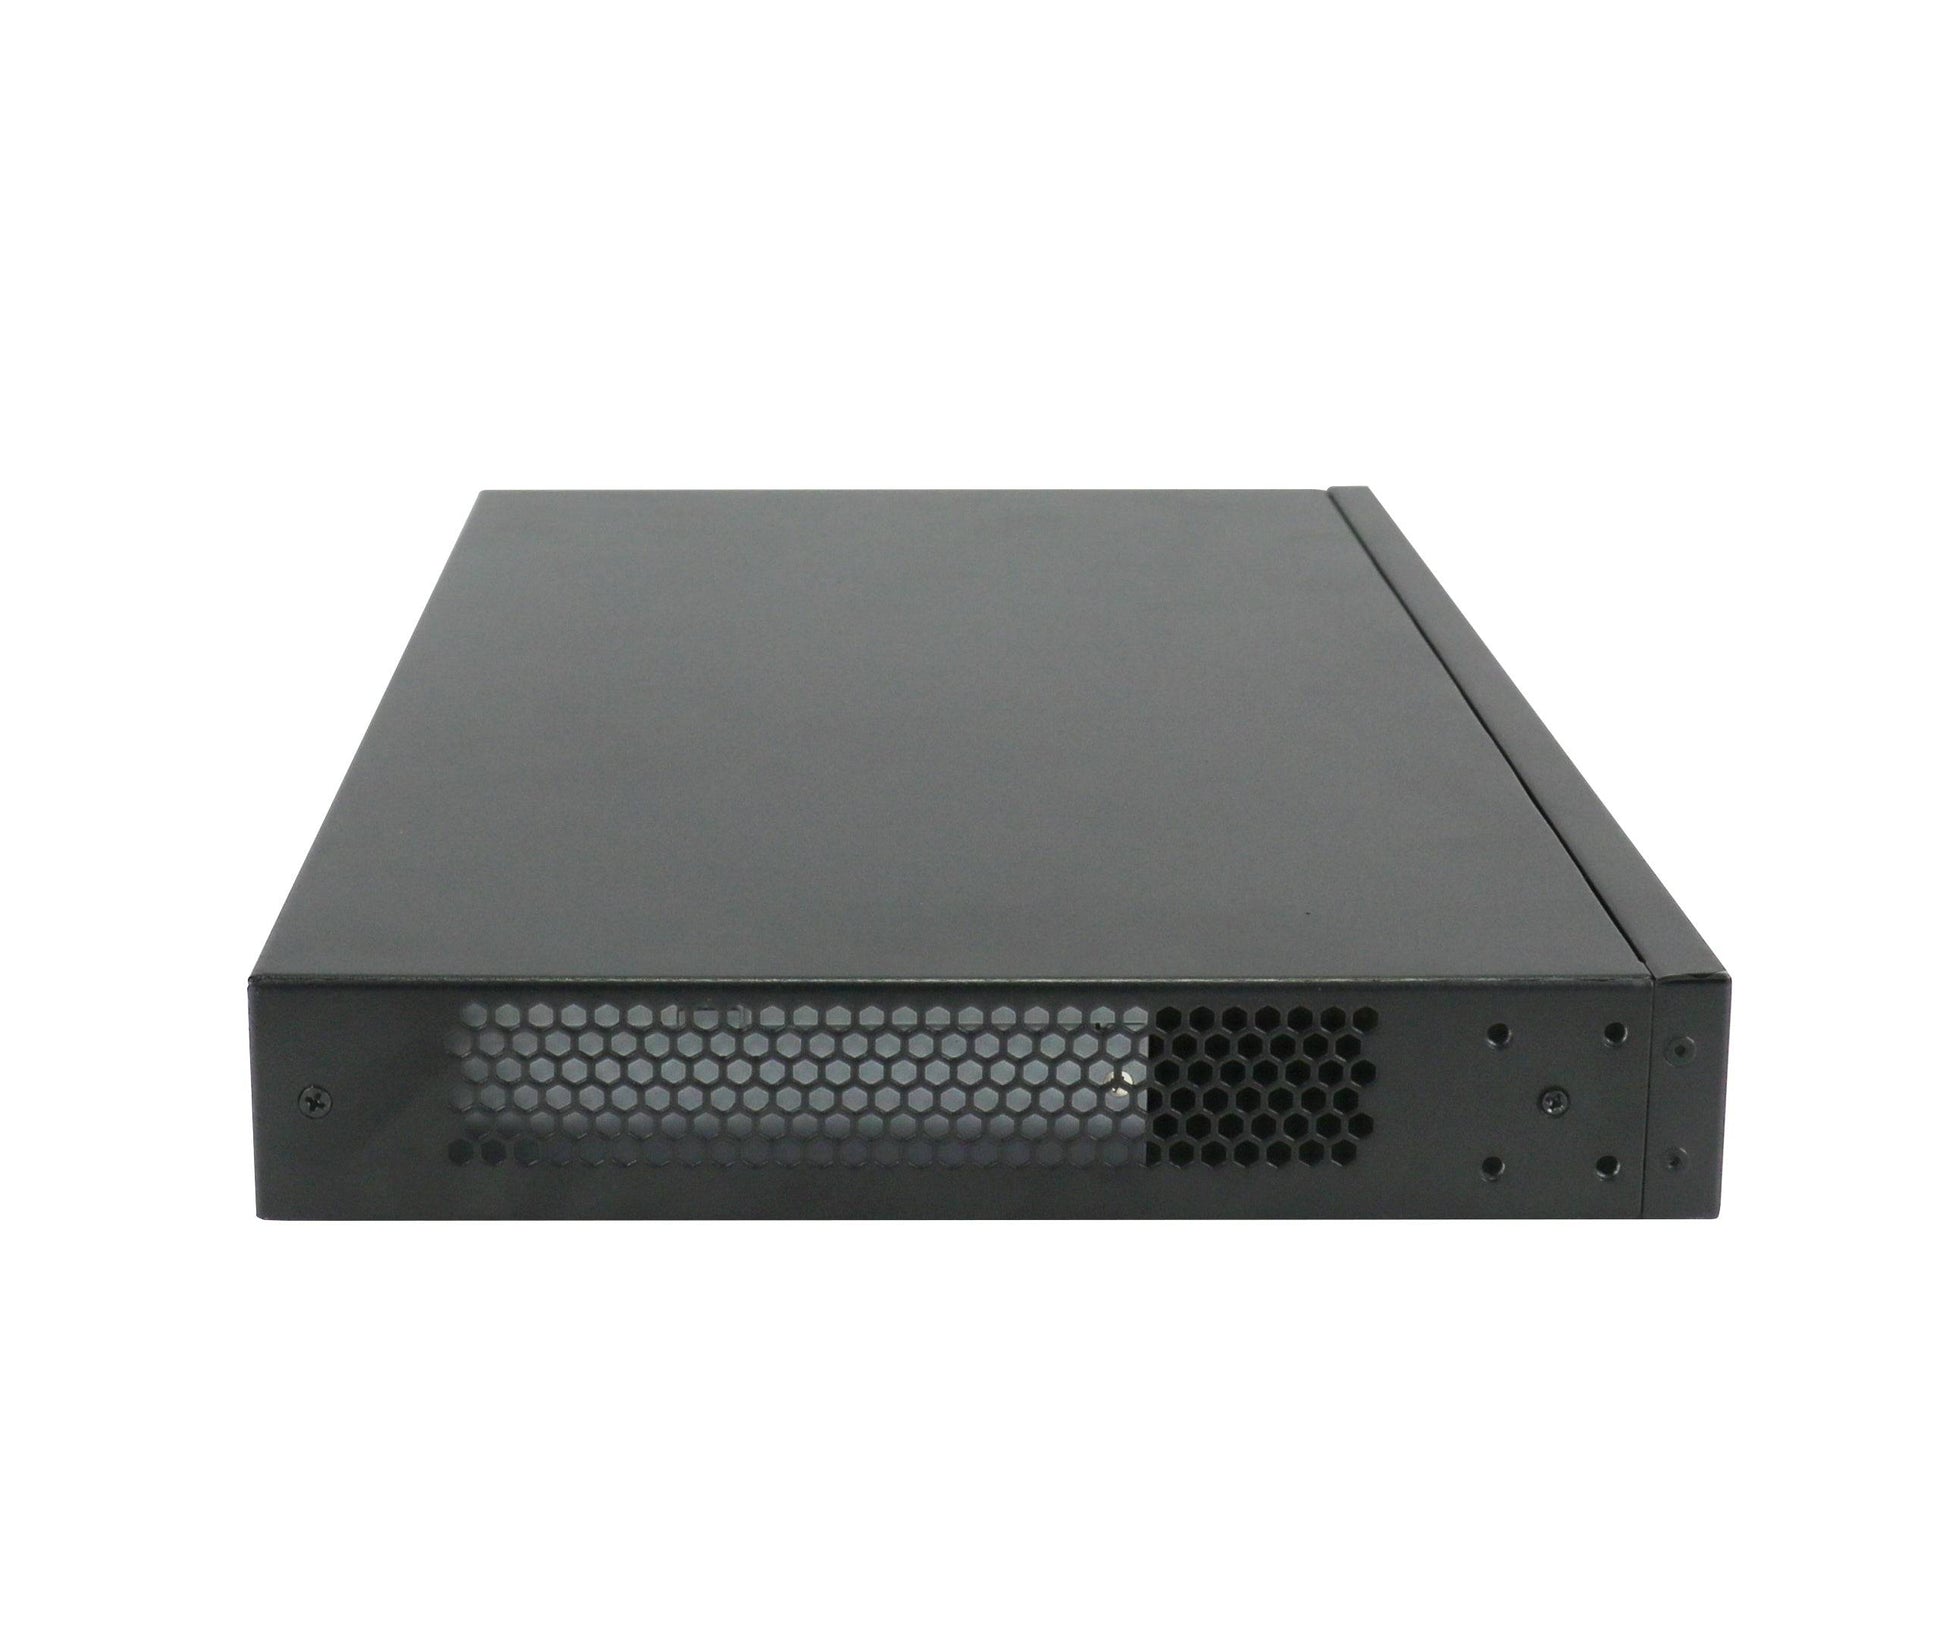 SecPoint Penetrator S9 - 16 IP Concurrent Scan License Vuln Scanning Appliance (1 Year License) - SecPoint